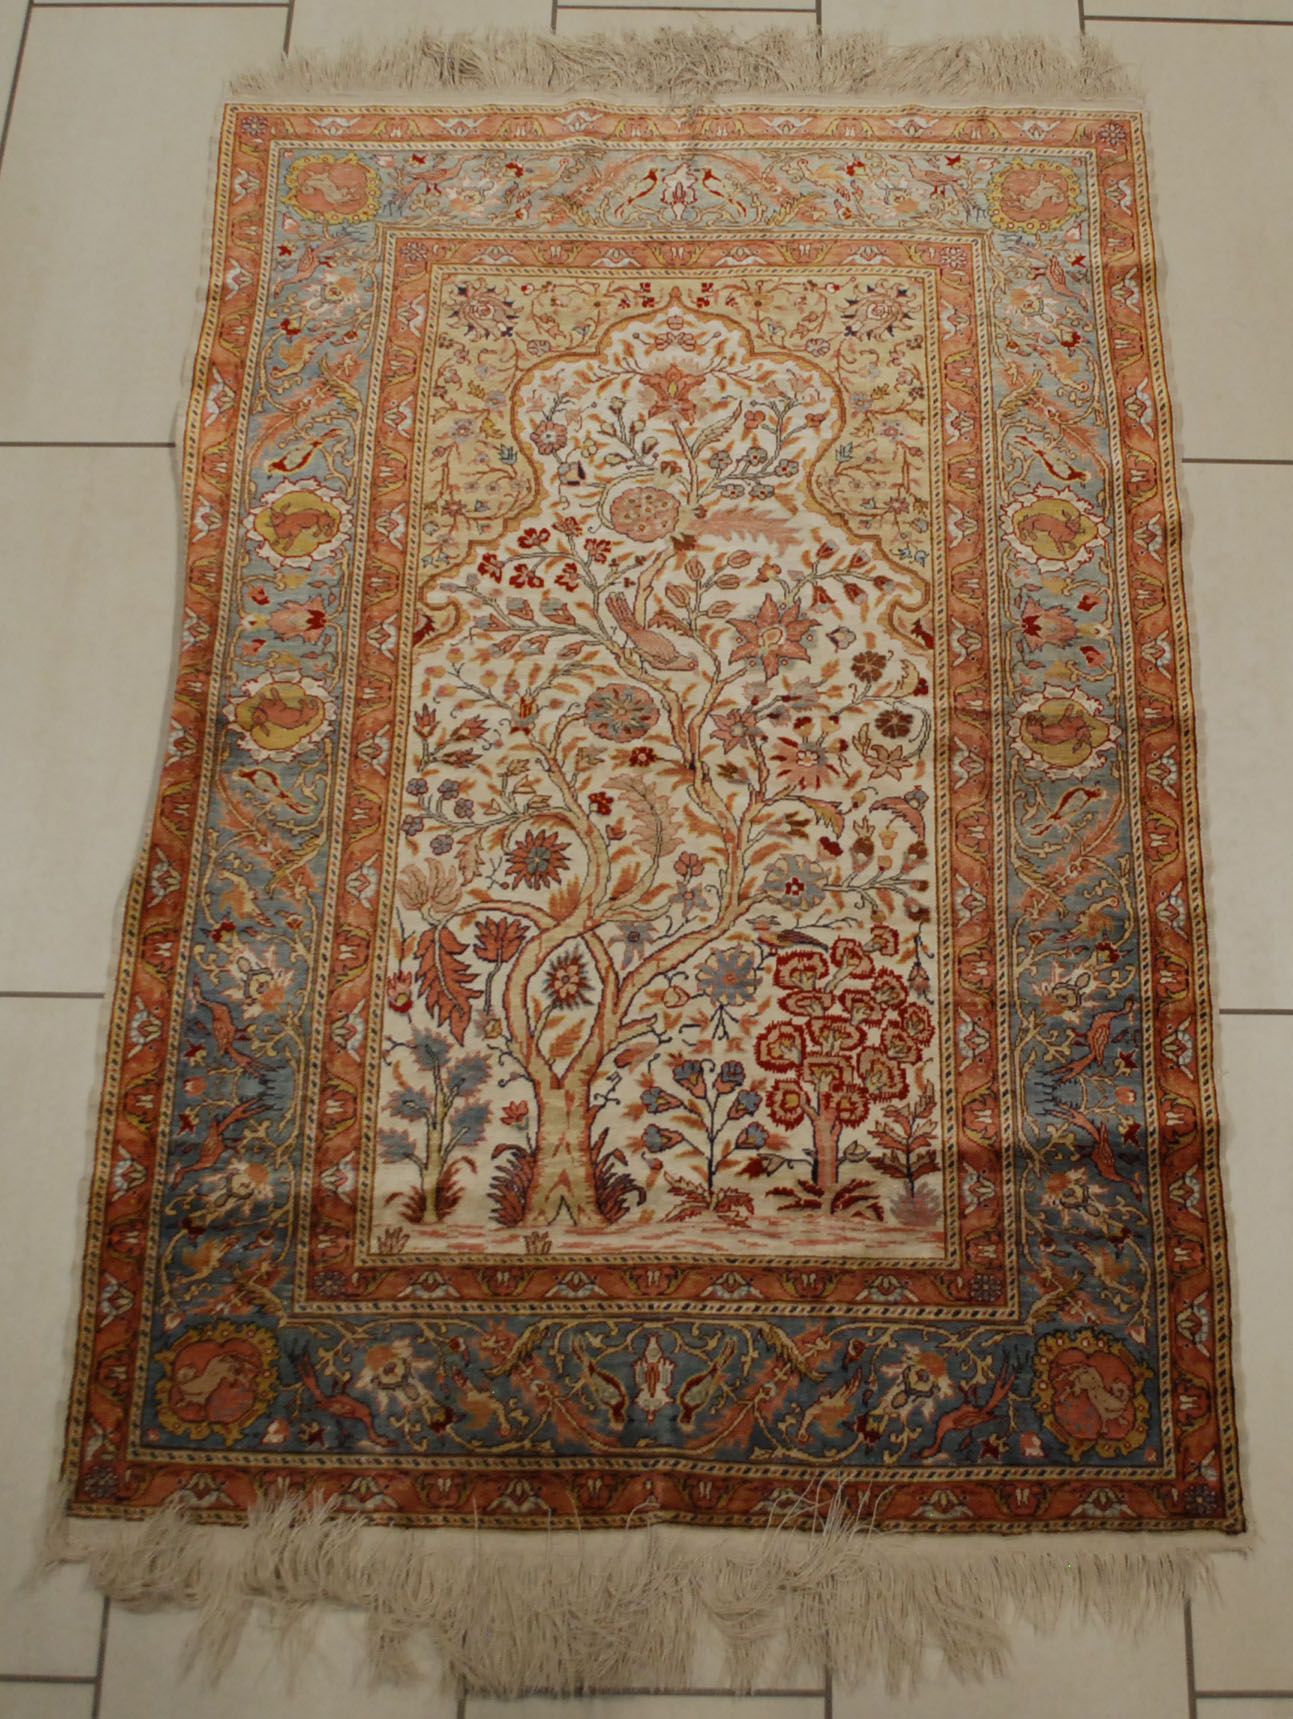 Tapis Goum en soie. With the motive of a tree with bird.

Size: 160 x 100 cm.